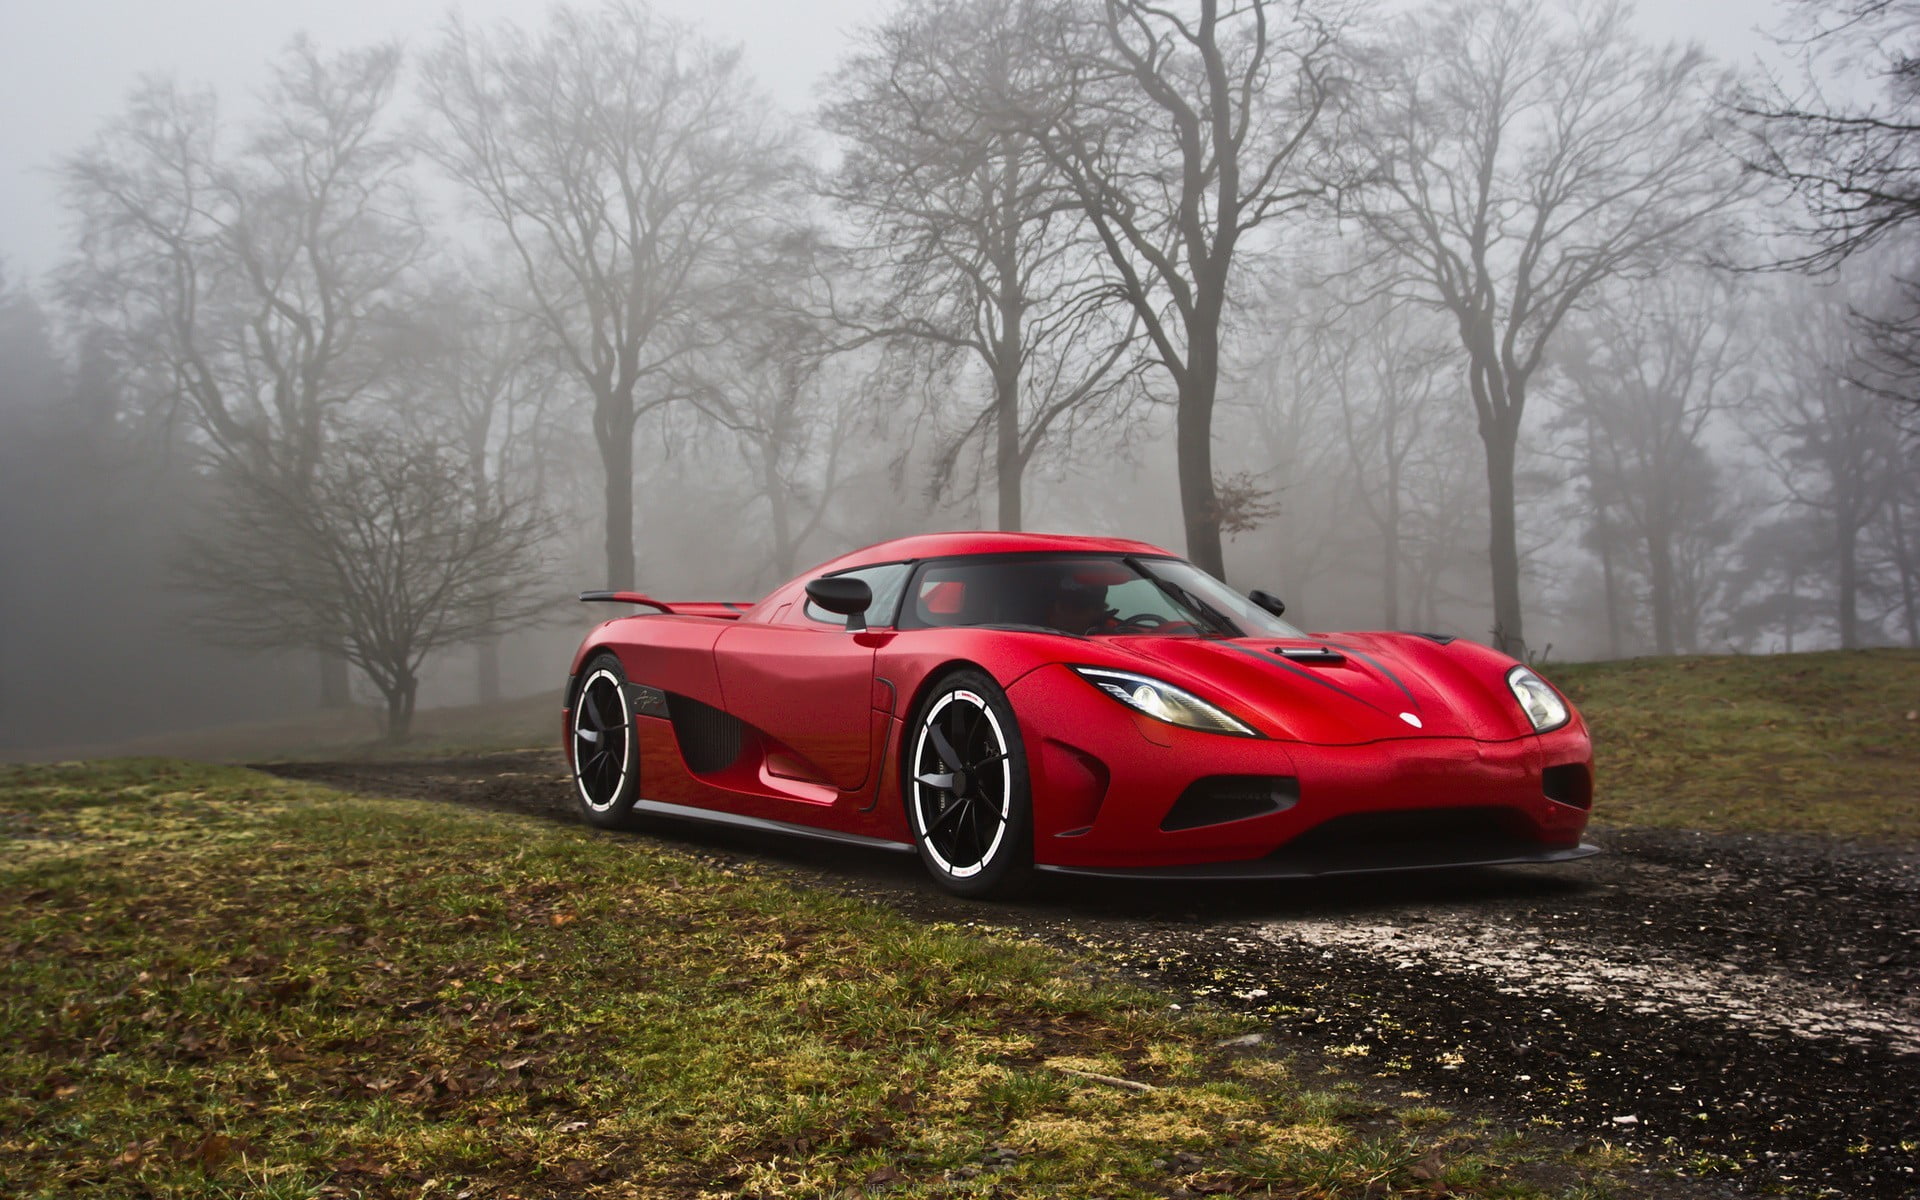 red and black car bed frame, Koenigsegg Agera R, dusk, tree, plant